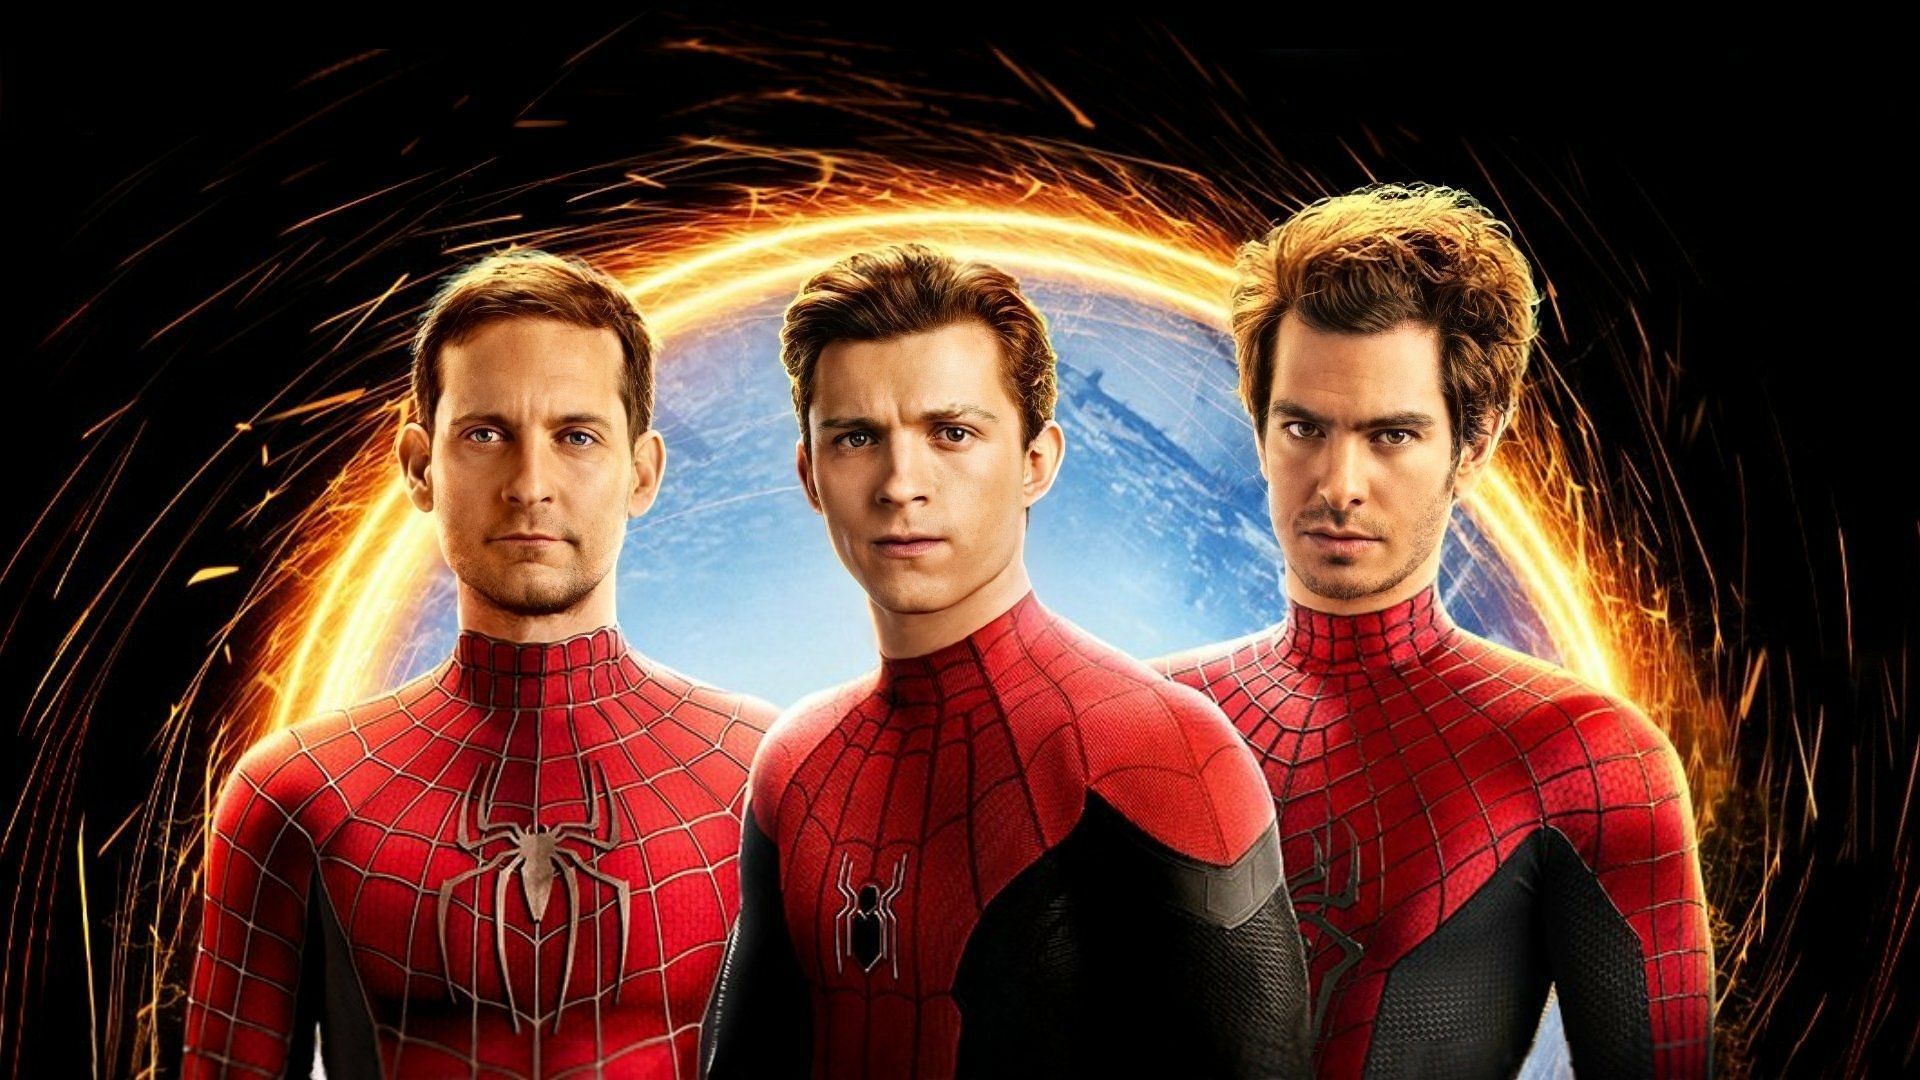 Tobey Maguire, Tom Holland, and Andrew Garfield as their versions of Peter Parker in a poster for Spider-Man: No Way Home (image via Sony Pictures/Marvel Studios)